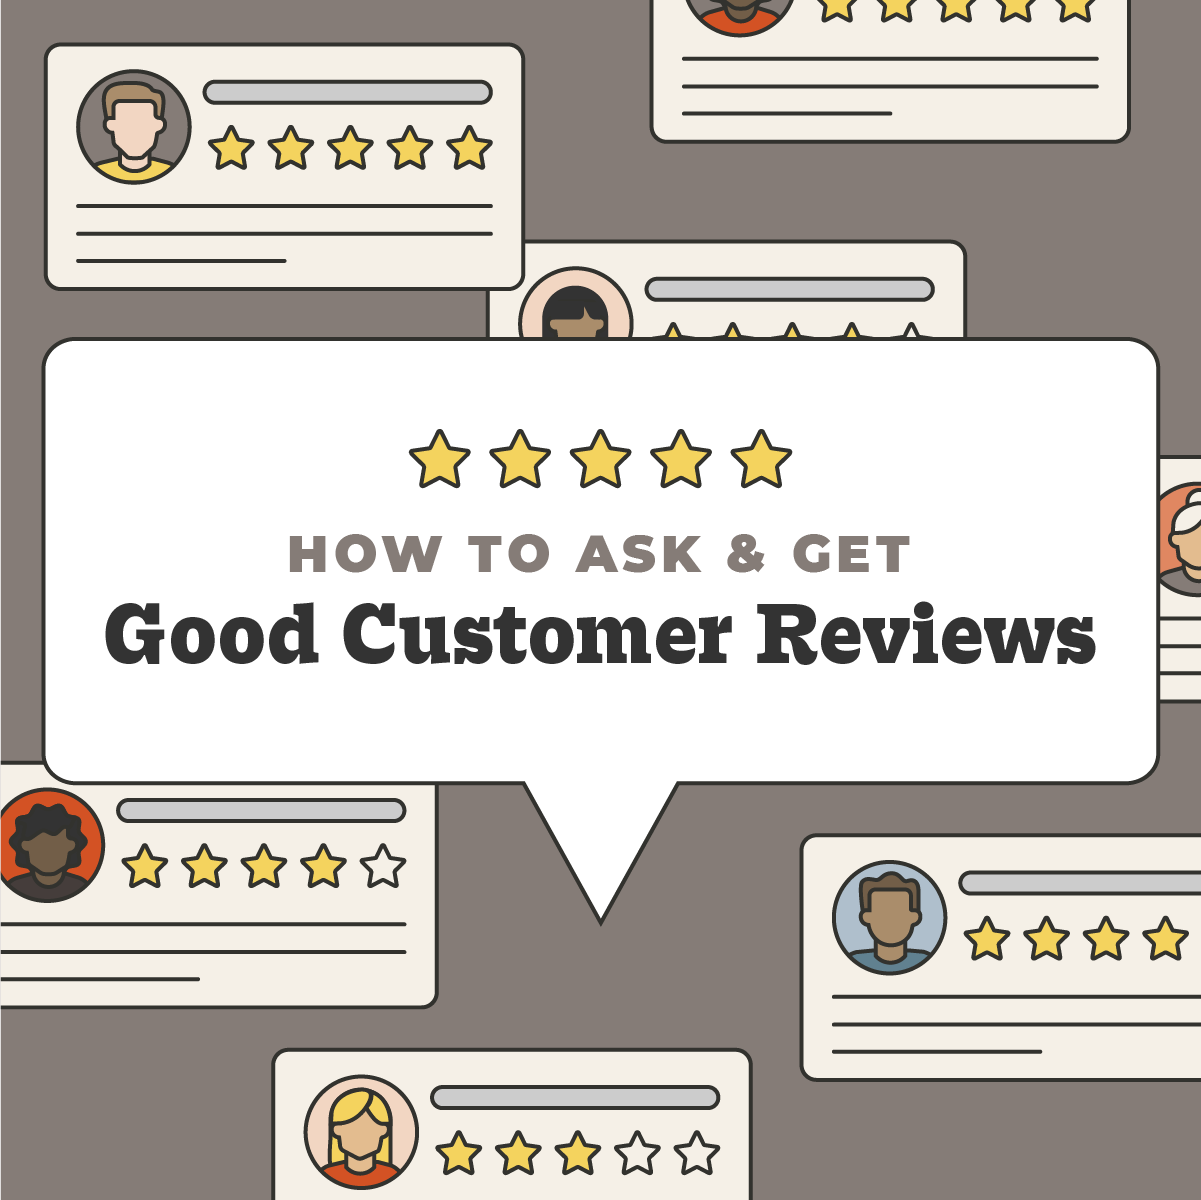 A Guide to Asking & Getting Good Customer Reviews